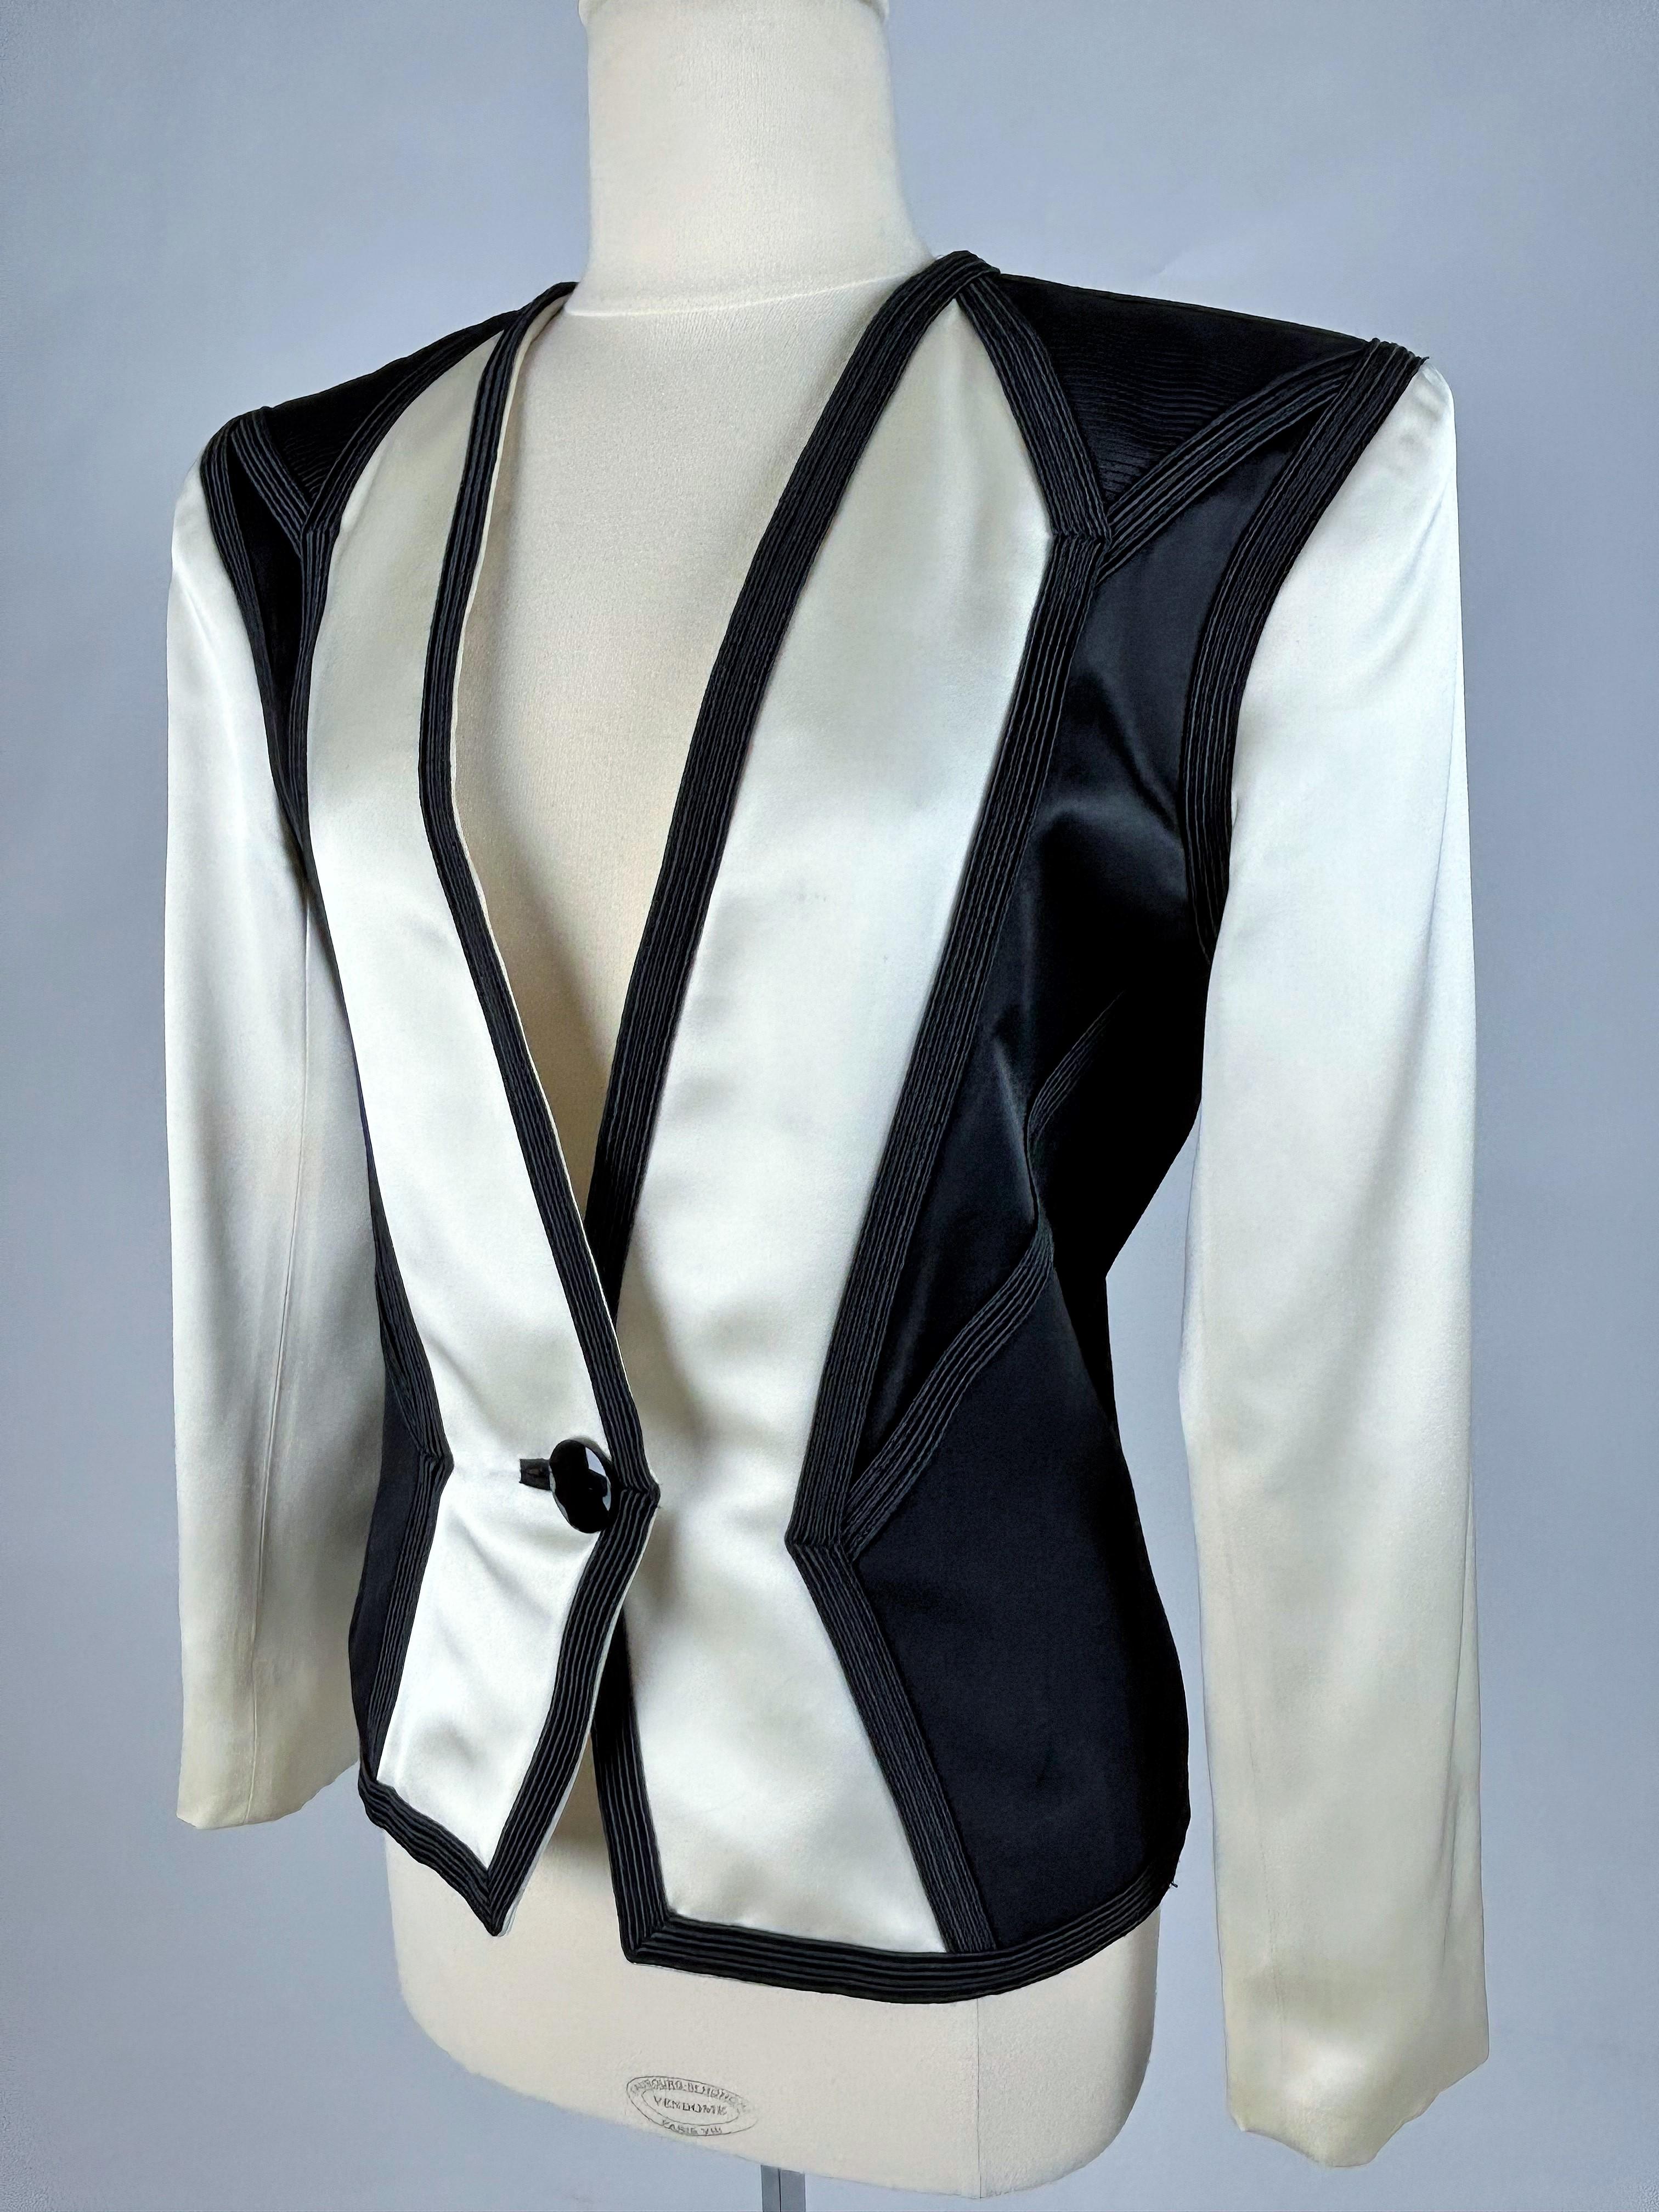 On hold for a french exhibition until November 2024, available after this date
Circa 1988-1990

France

Black and white tuxedo jacket by Yves Saint Laurent Rives Gauche, from the famous couturier's Autumn Winter 1988-1989 collection. The young Anna